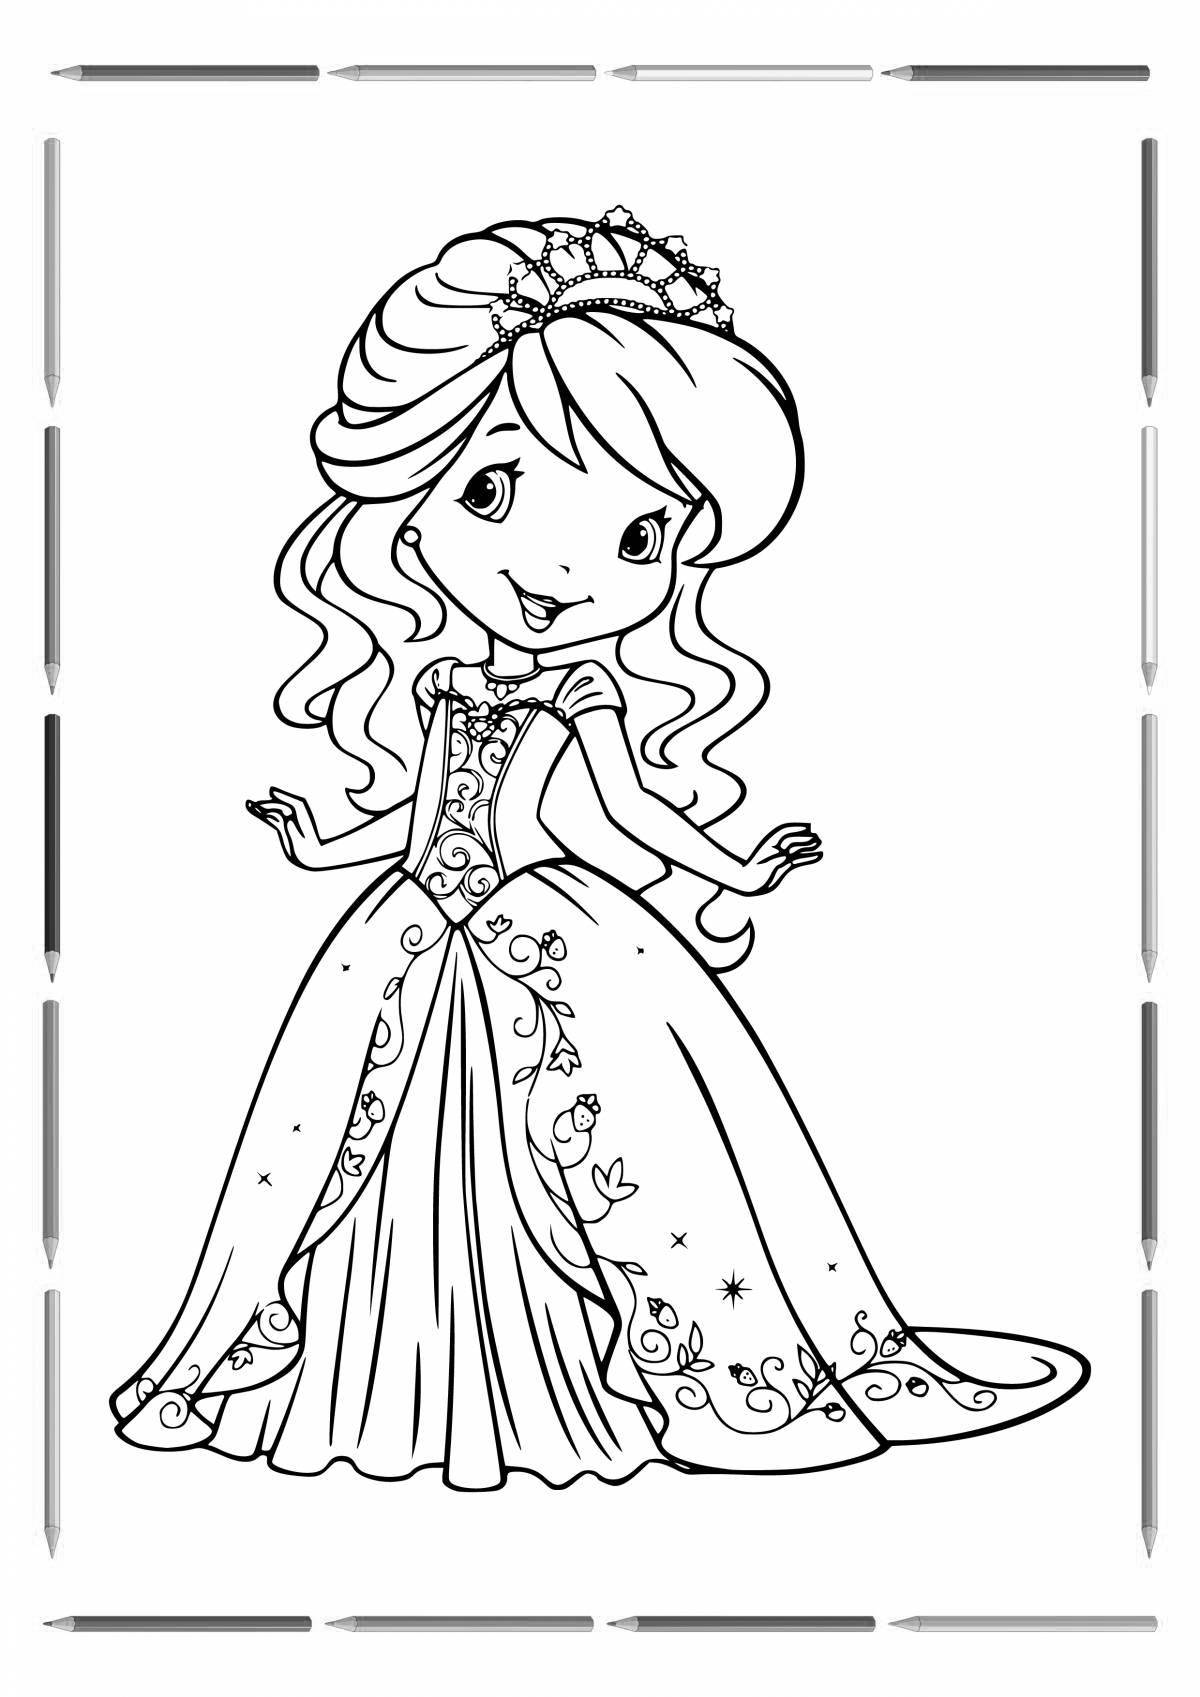 Colourful princess coloring pages for girls 4-5 years old